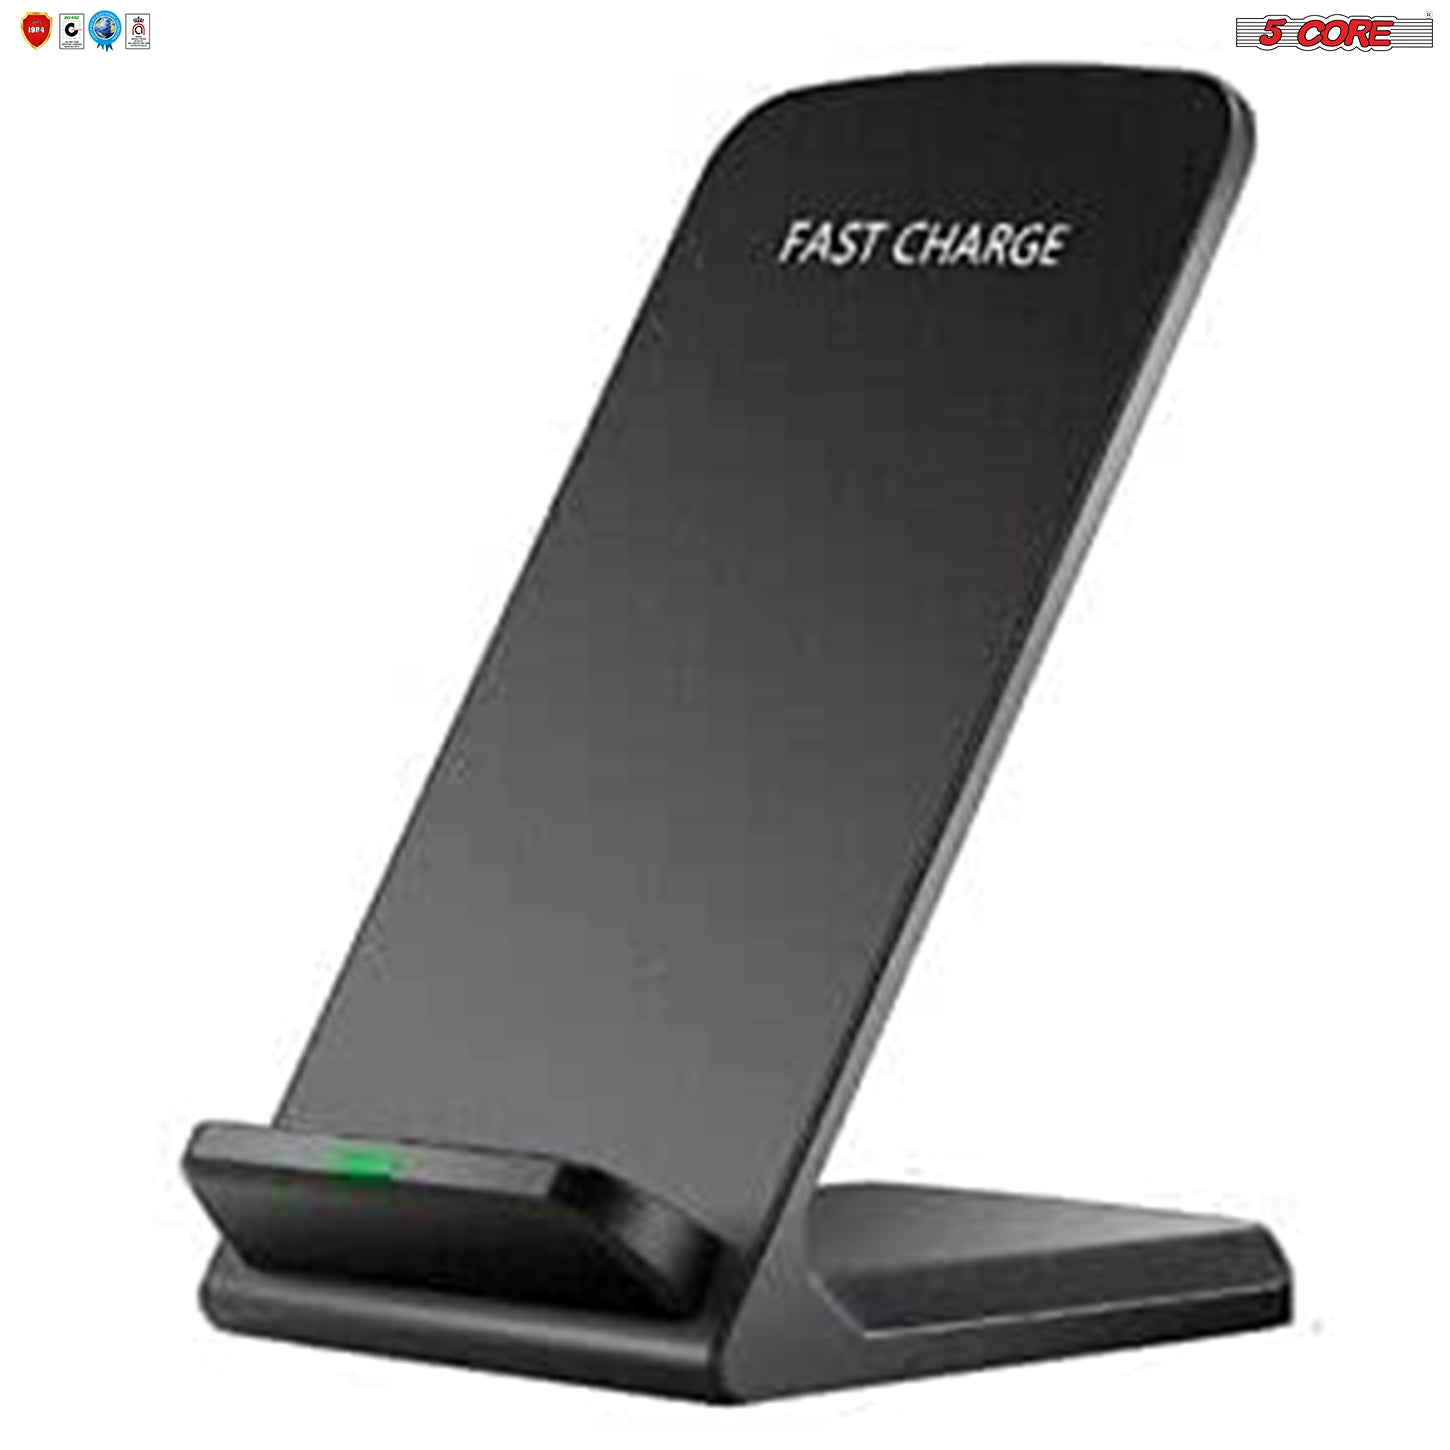 5 Core Wireless Charge, 10W Max Wireless Charging Stand, Qi Wireless Charging Stand Compatible with All Smart Phones